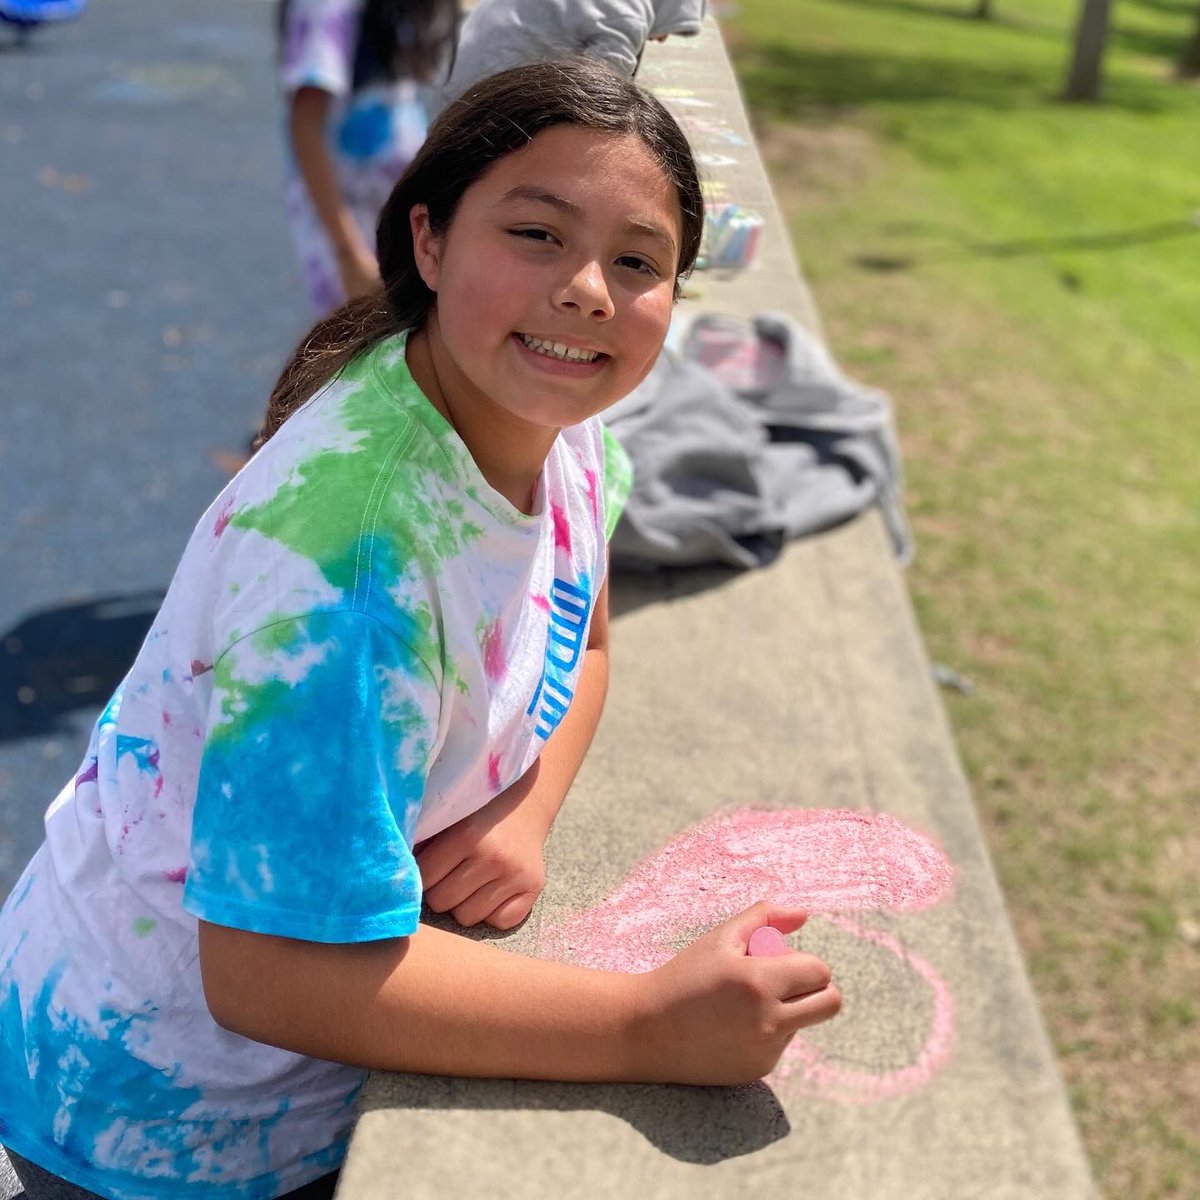 Easter EGG-Stravaganza: Hunt, hop, and play at the park! 🥚🐰🌳
#vbgc #easter #easterfun #eastertime #easterfun #egghunt #relayrace #sackrace #easterweekend #boyleheights #alhambra #alhambrapark #greatfutures #greatfuturesstarthere